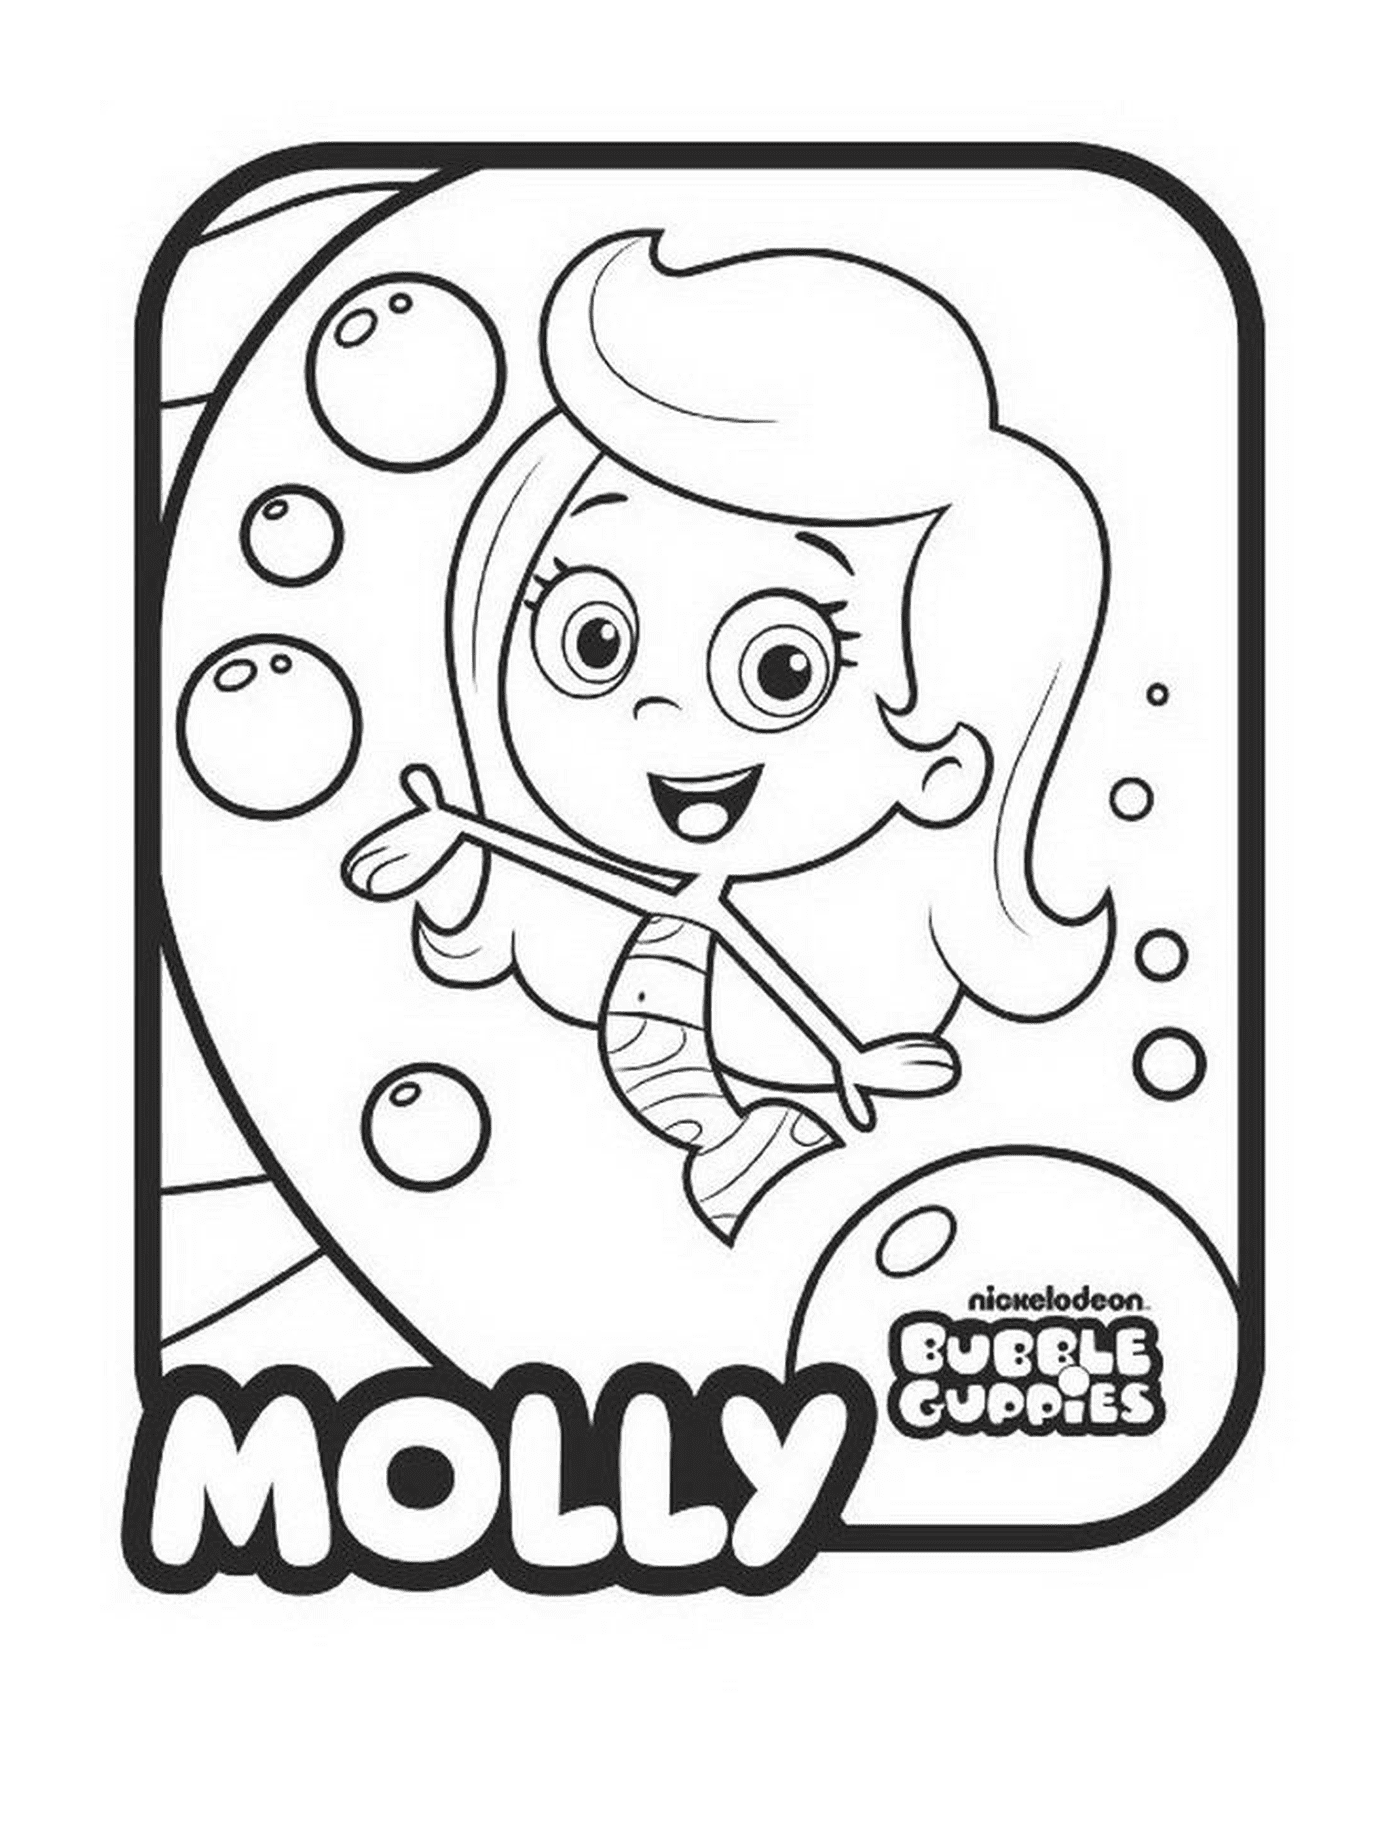  Molly of the Bubble Guppies 